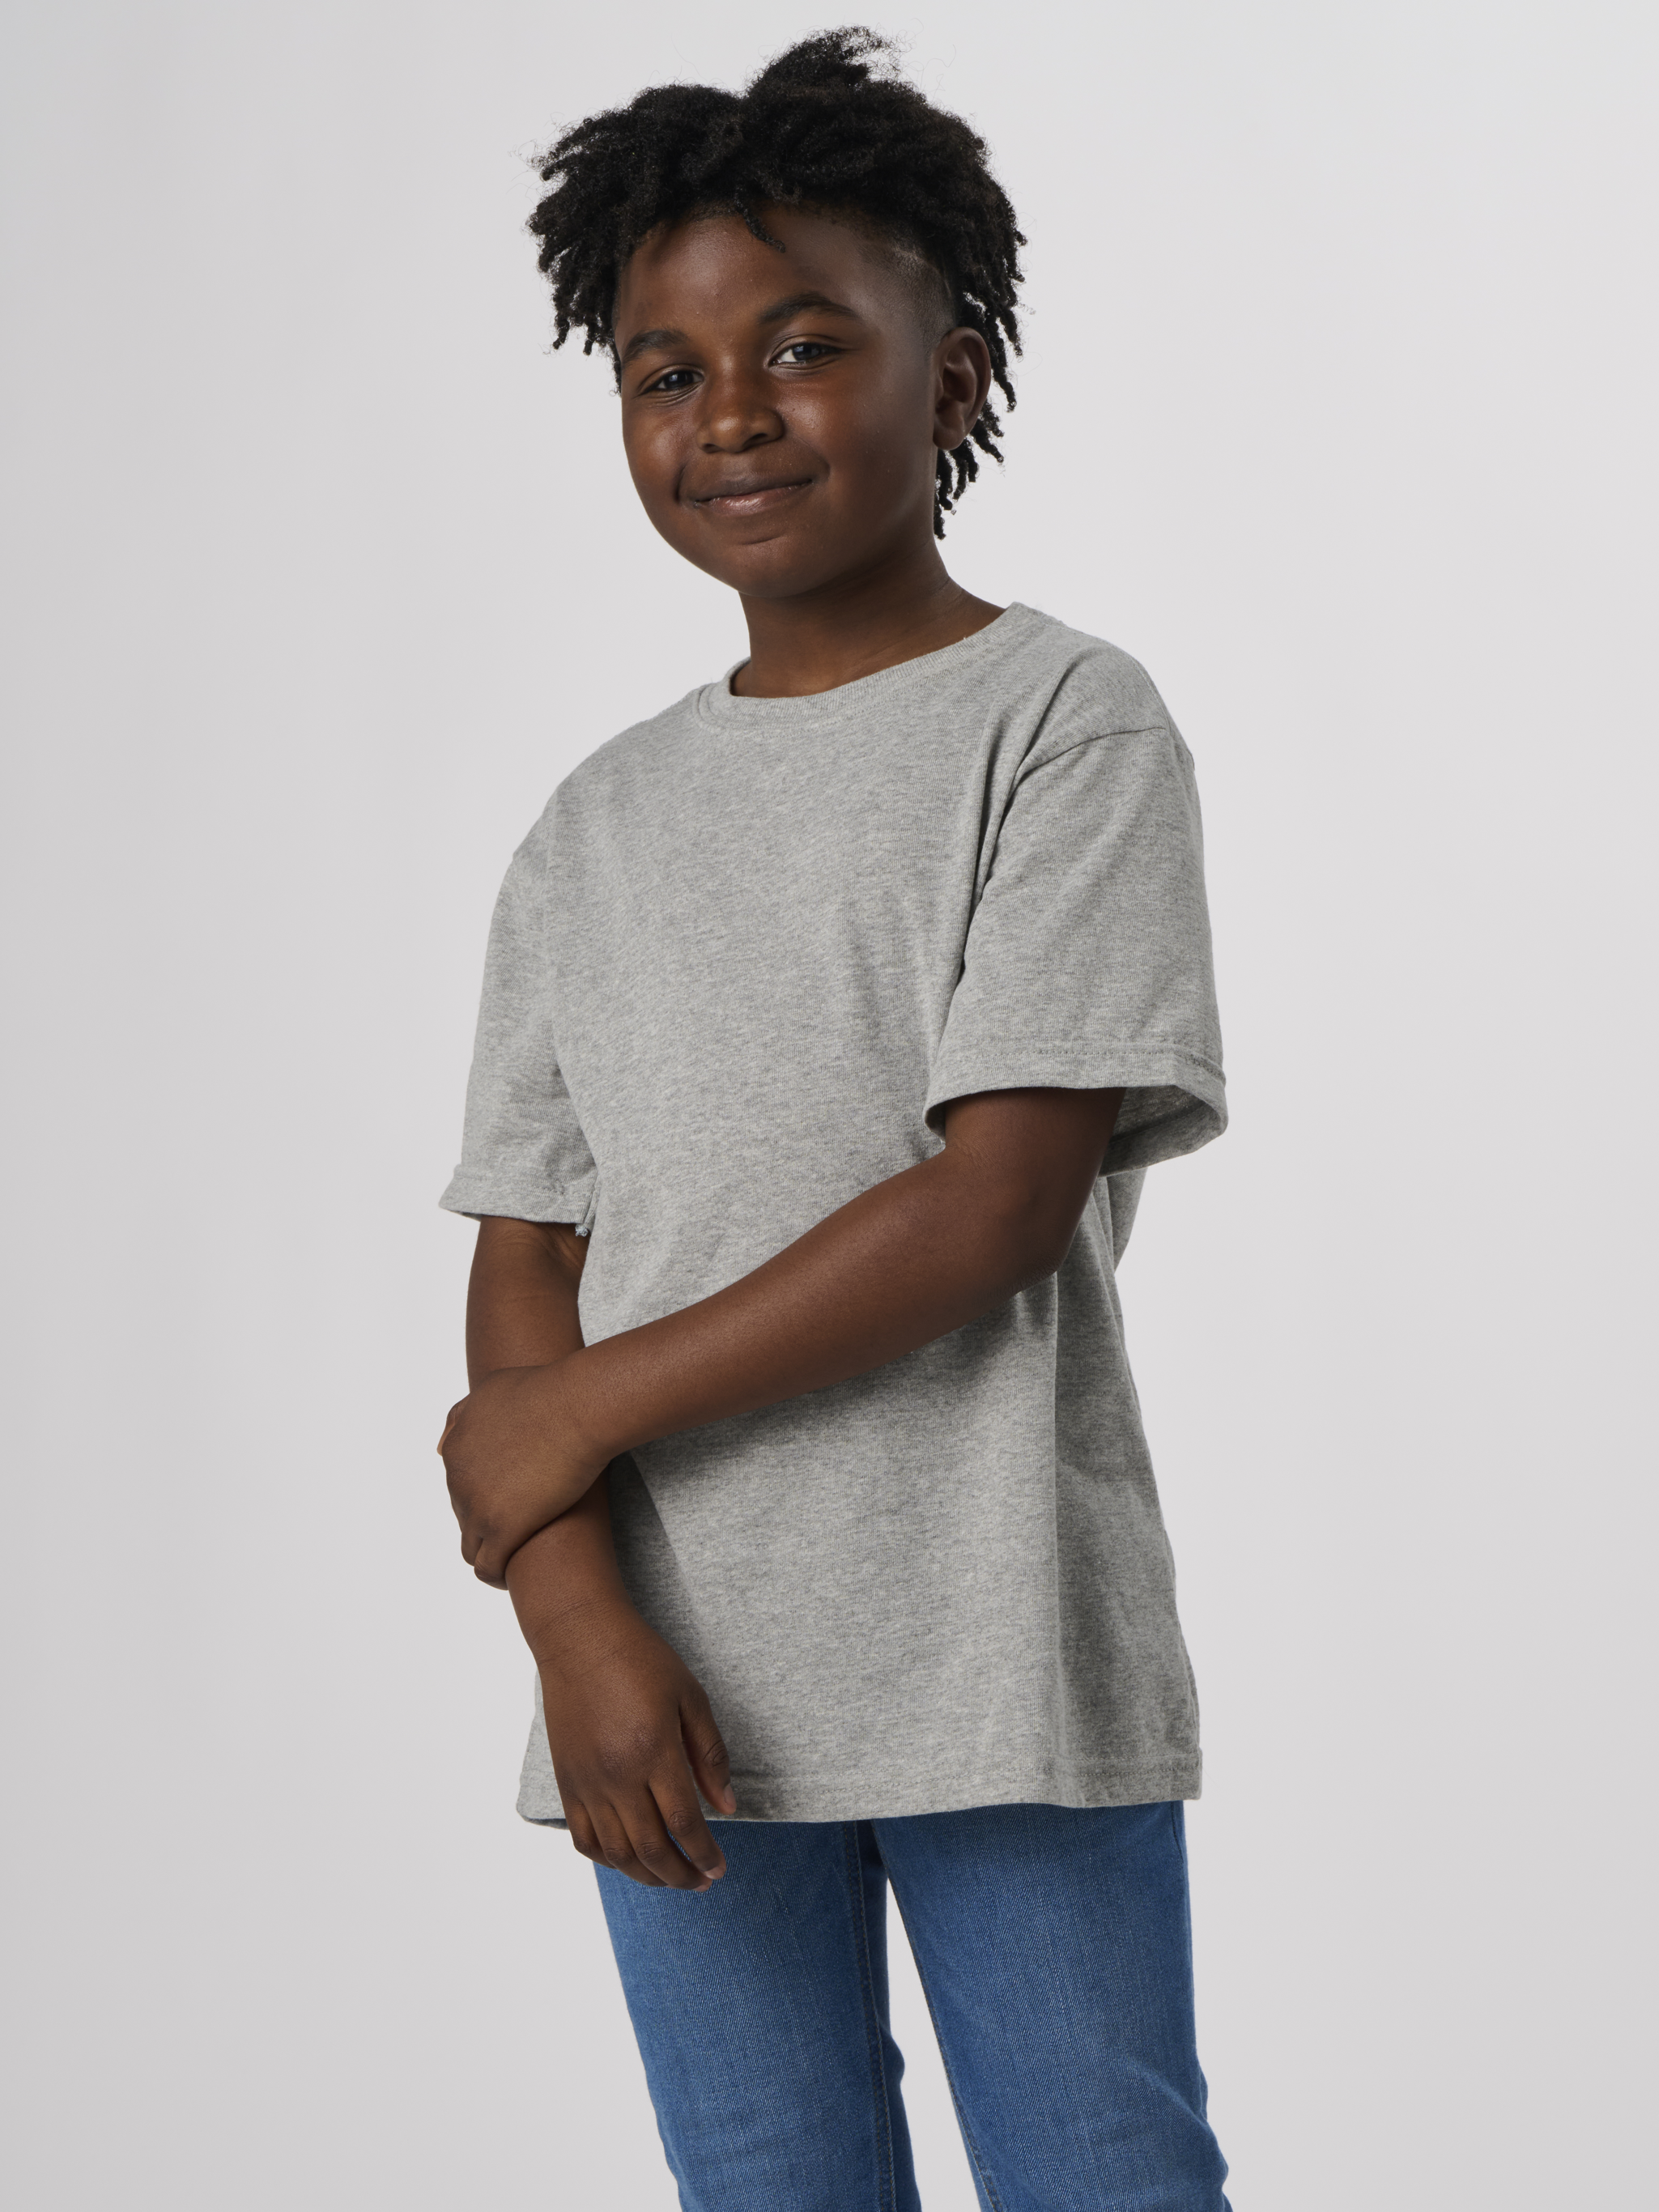 RECOVER_RY100_YOUTHSHORTSLEEVETSHIRT_ALUMINUM_FRONT.png